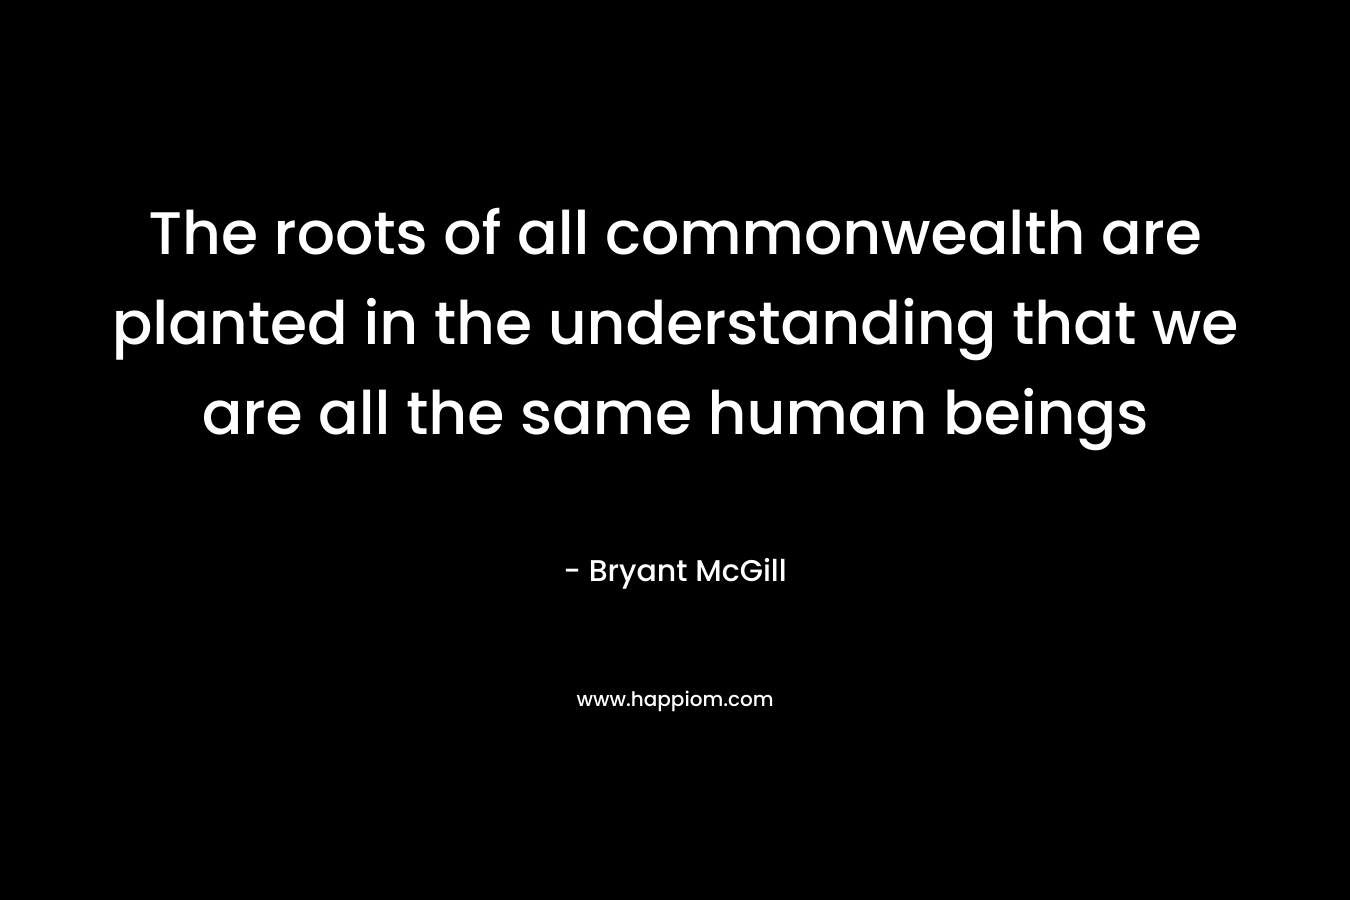 The roots of all commonwealth are planted in the understanding that we are all the same human beings